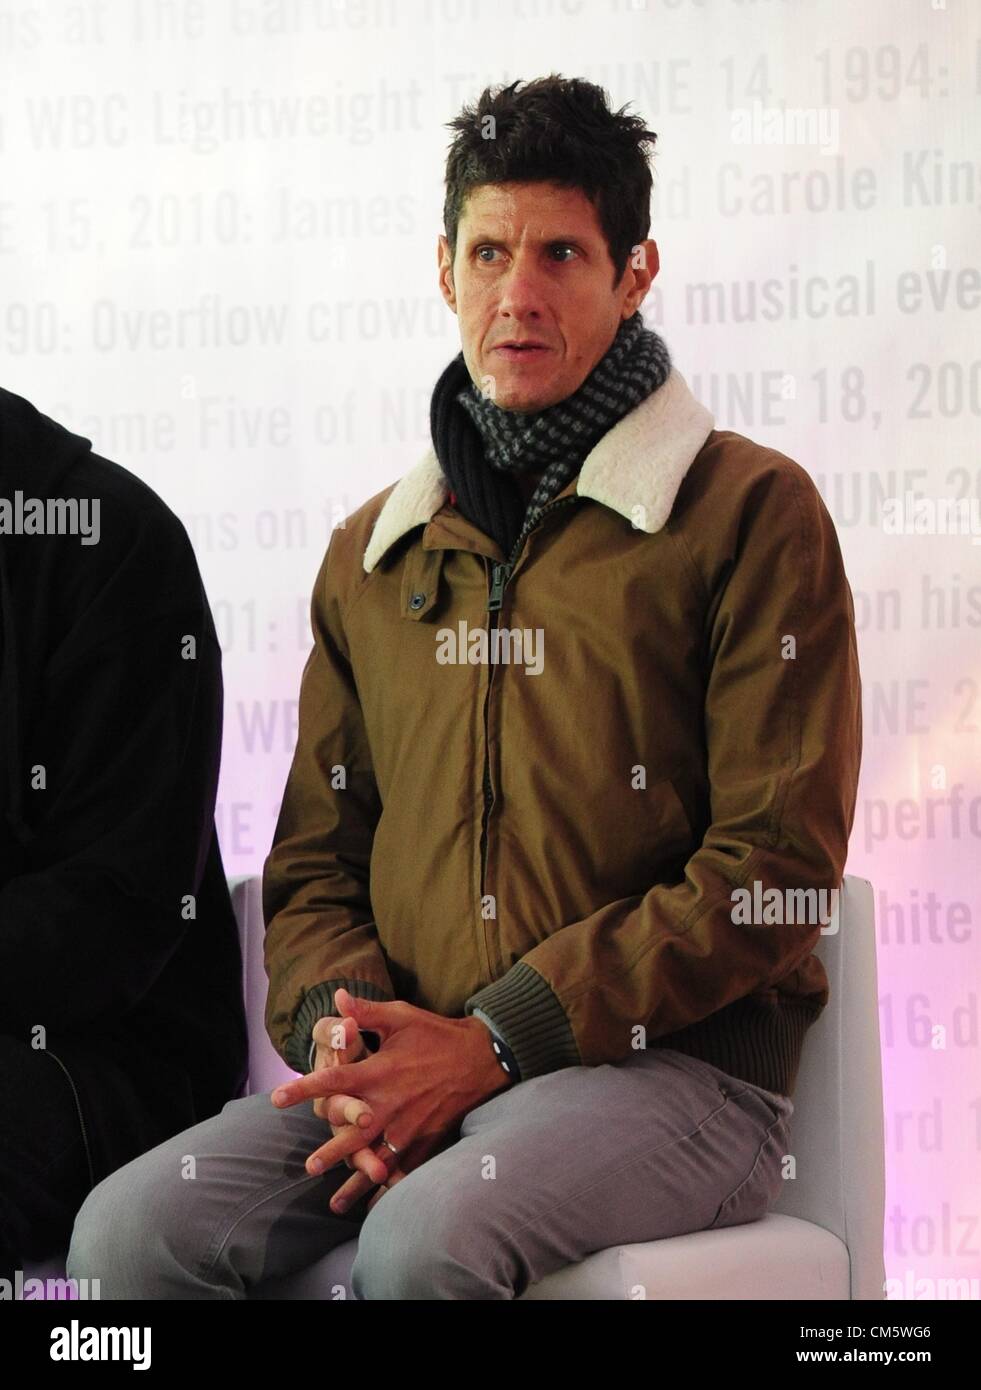 Oct. 11, 2012 - New York, New York, U.S. - Beastie Boys' MIKE D looks on as Madison Square Garden celebrates great moments in the Arena's more than 130 year history with an event on Thursday at Madison Square Park, the location of the original and second Garden arenas. (Credit Image: © Bryan Smith/ZUMAPRESS.com) Stock Photo